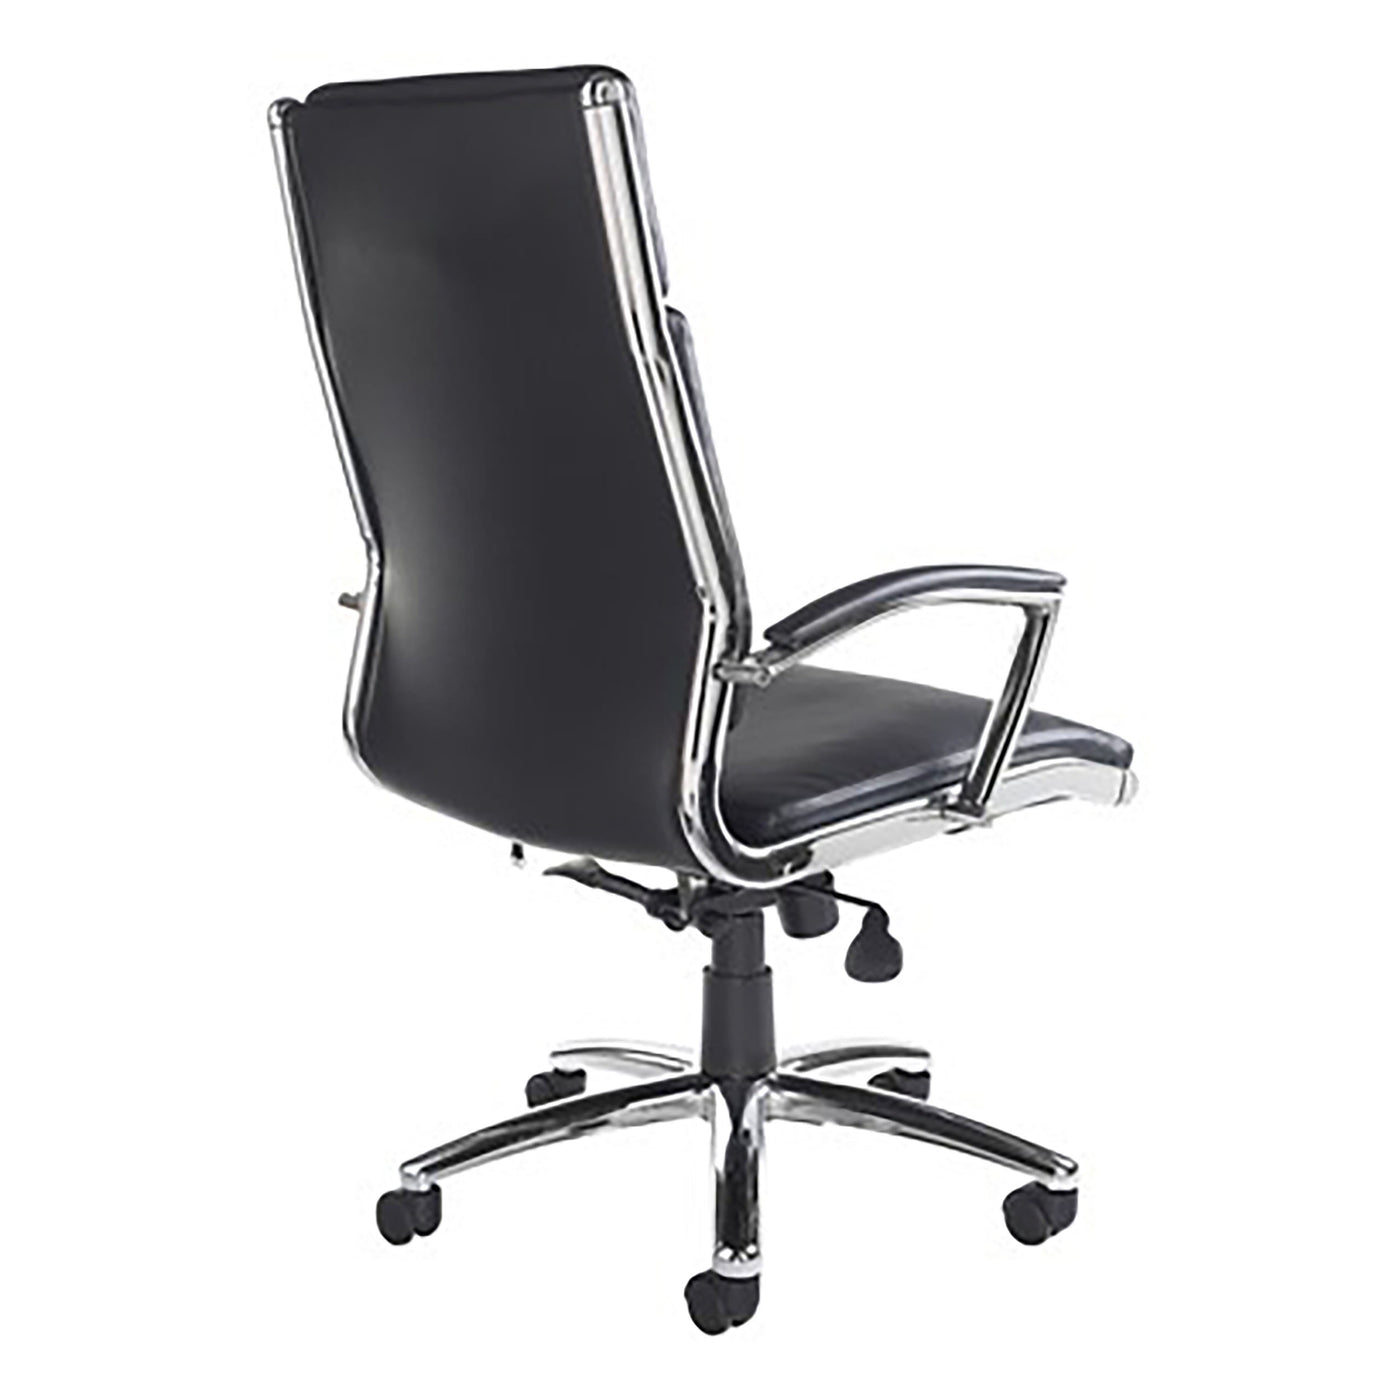 Florence Black Leather Faced Home Office Chair | Home Office Furniture | Ergonomic Home Office Furniture